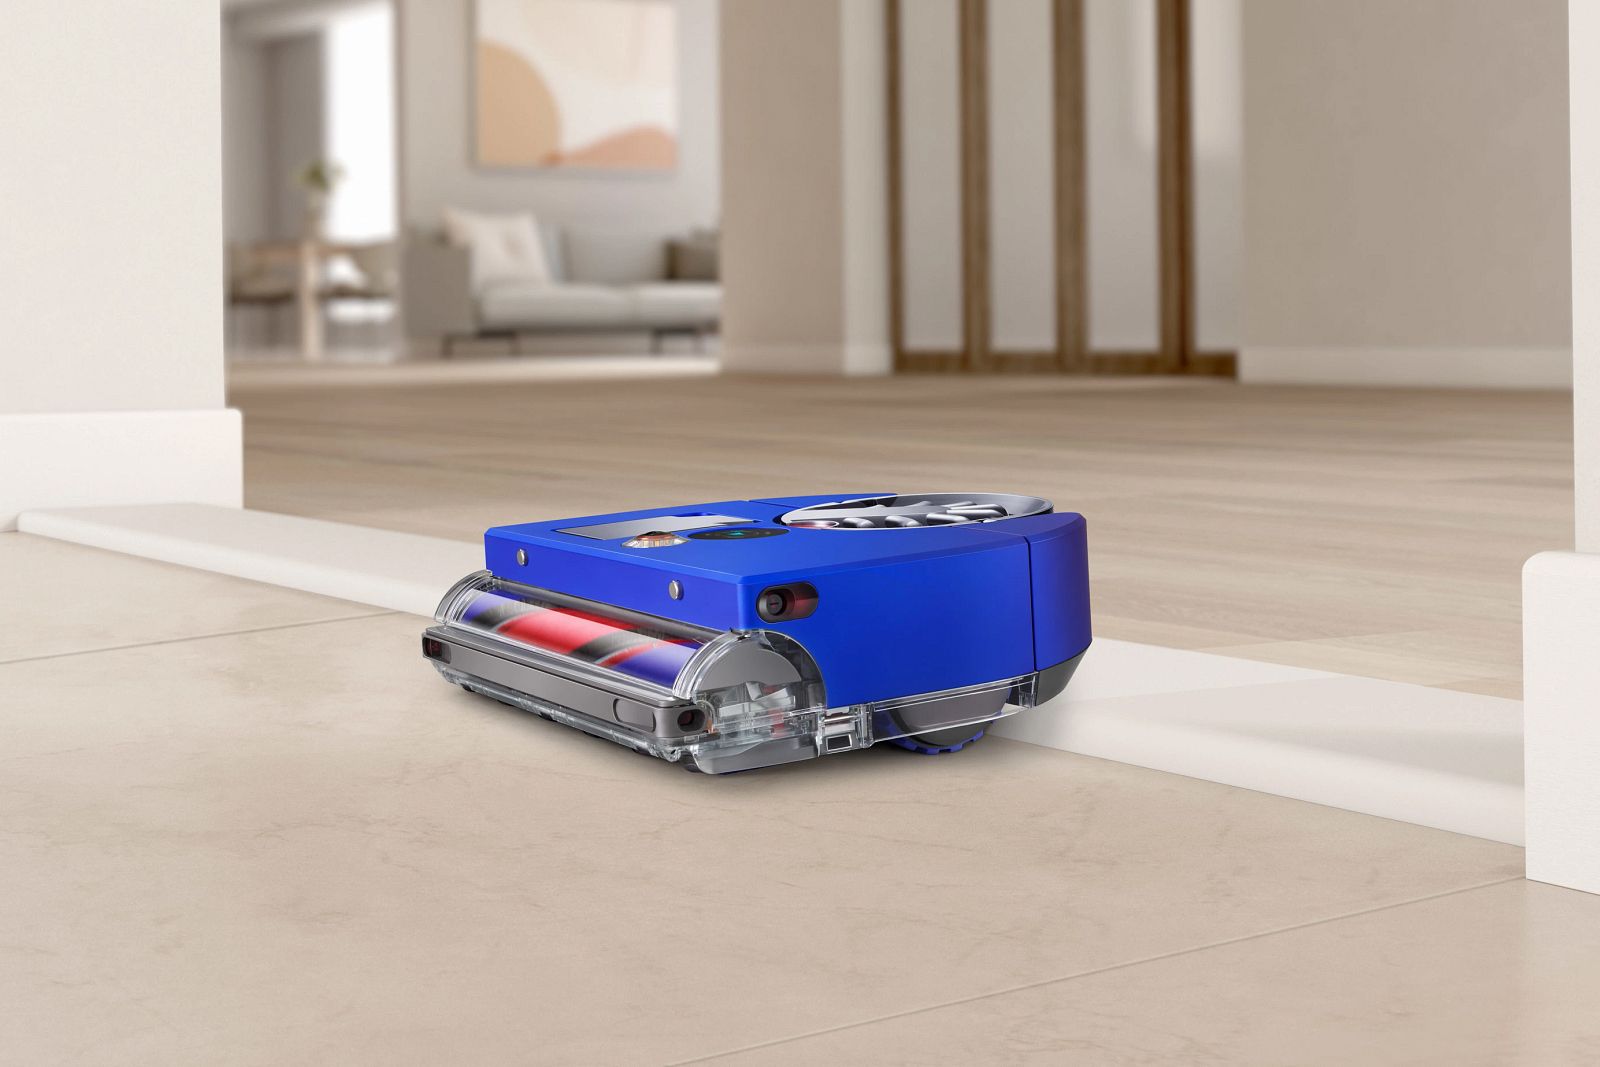 360 Vis Nav robot cleaner claims to 6x more than competition